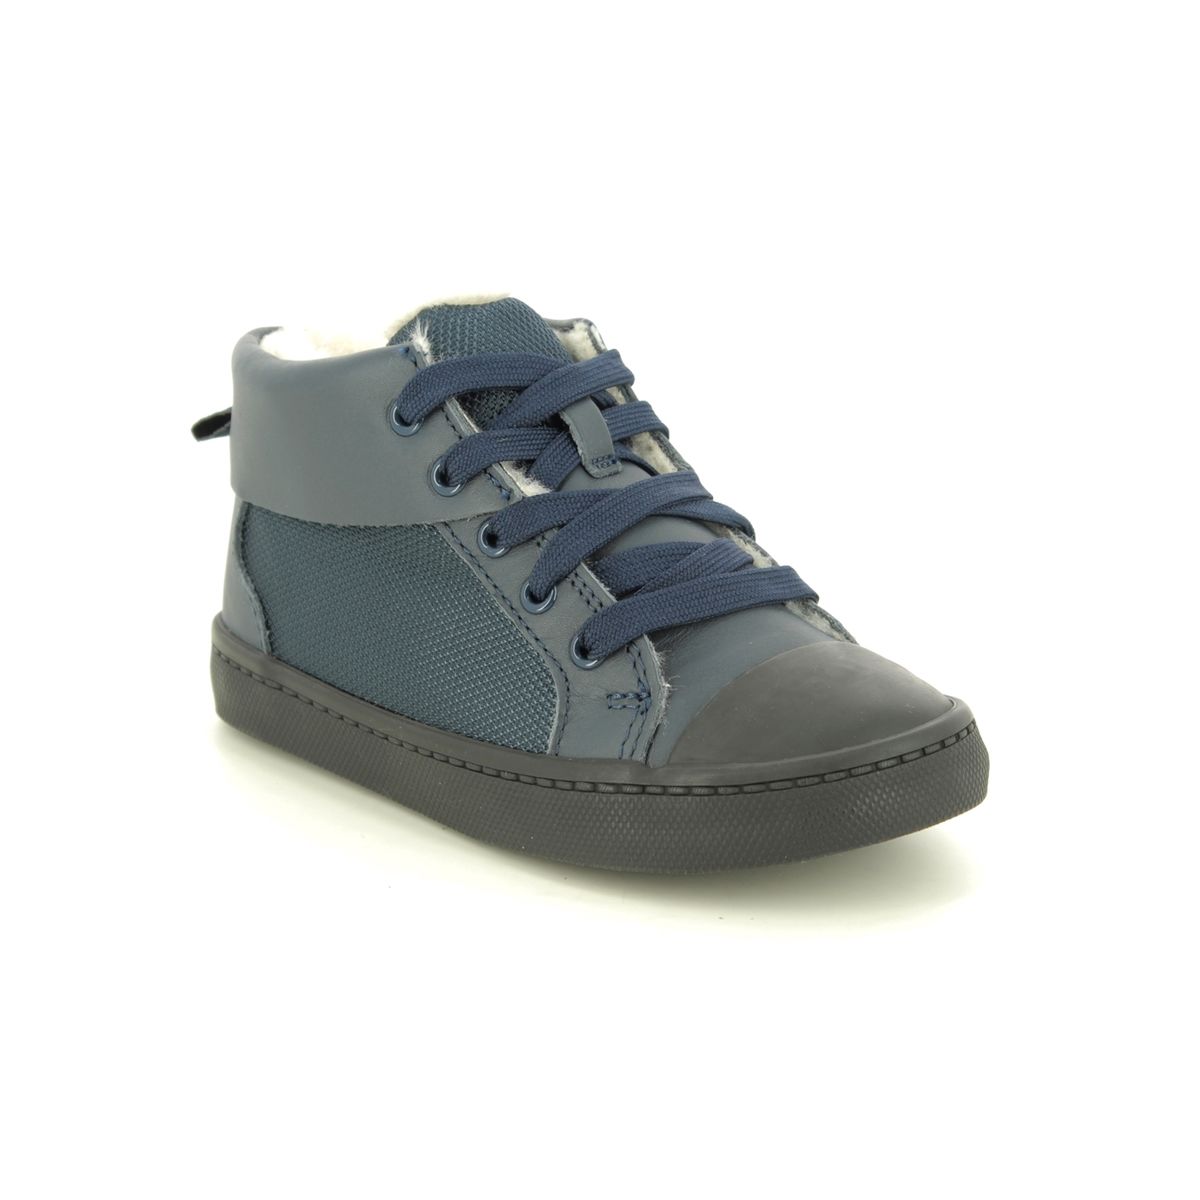 Clarks City Peak T Navy Kids Toddler Boys Trainers 4343-97G in a Plain Leather in Size 9